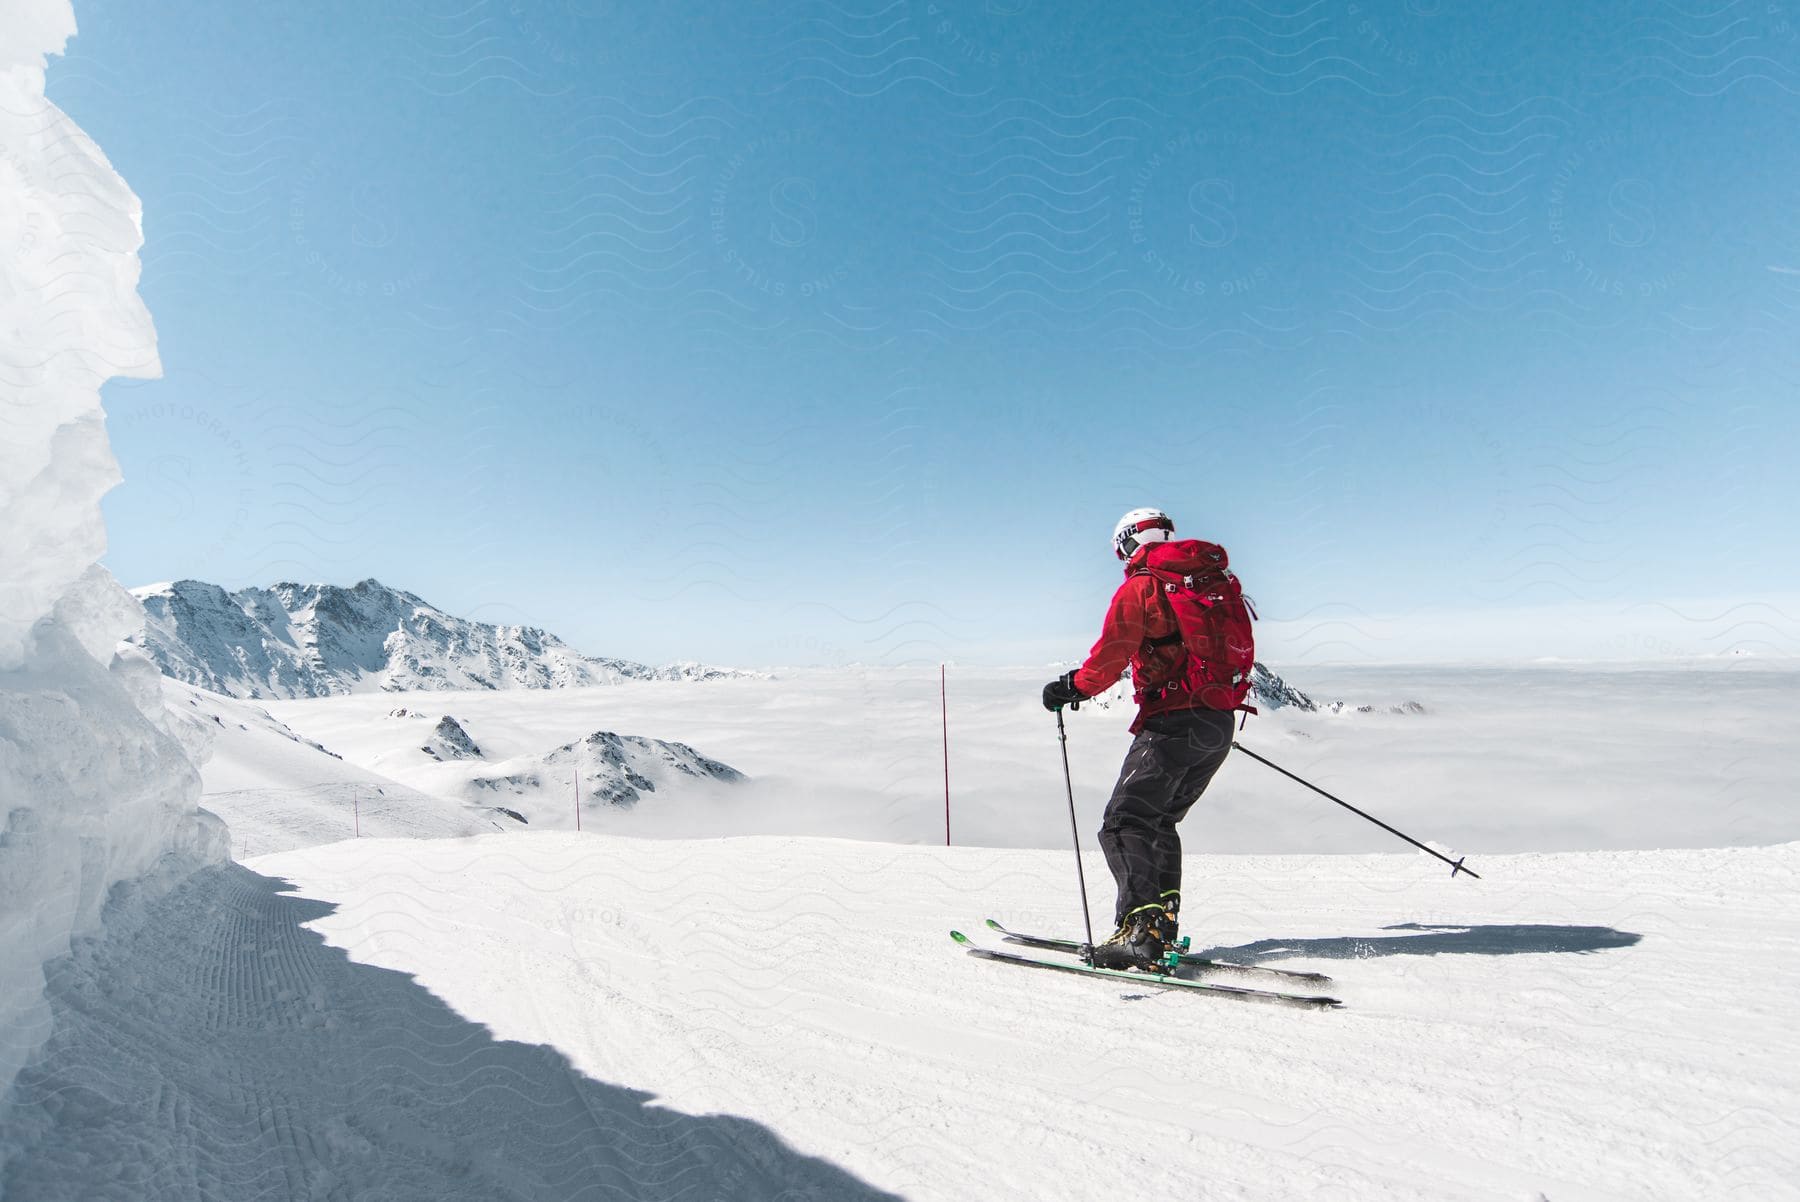 A man skis along a mountain in france